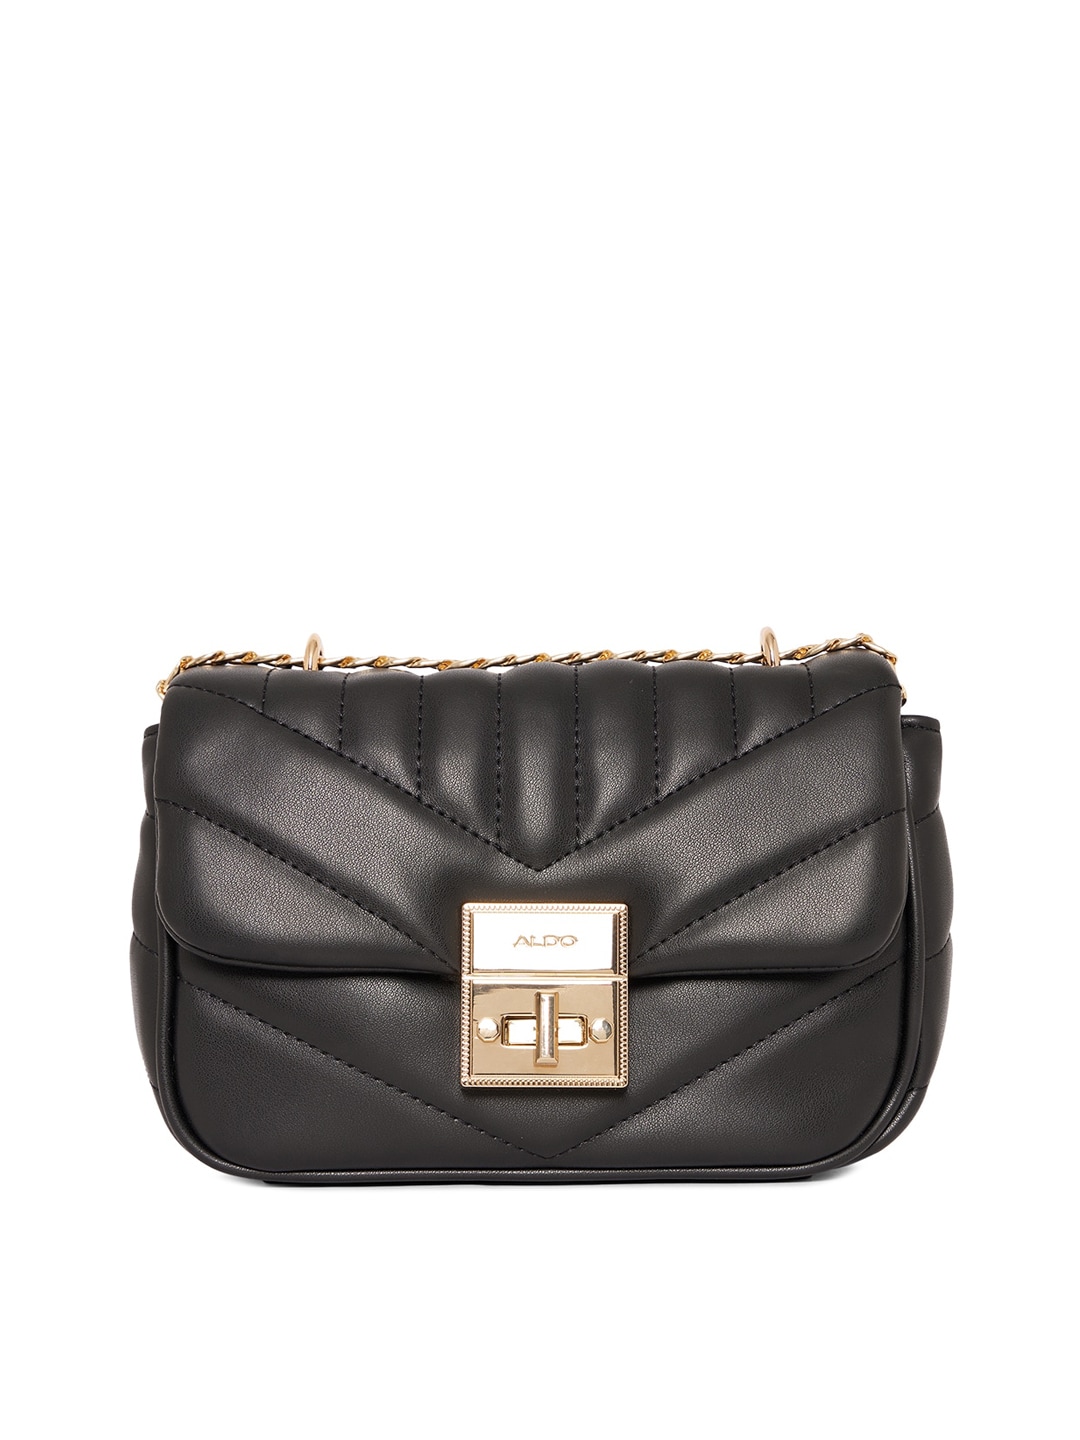 ALDO Black PU Half Moon Sling Bag with Quilted Price in India